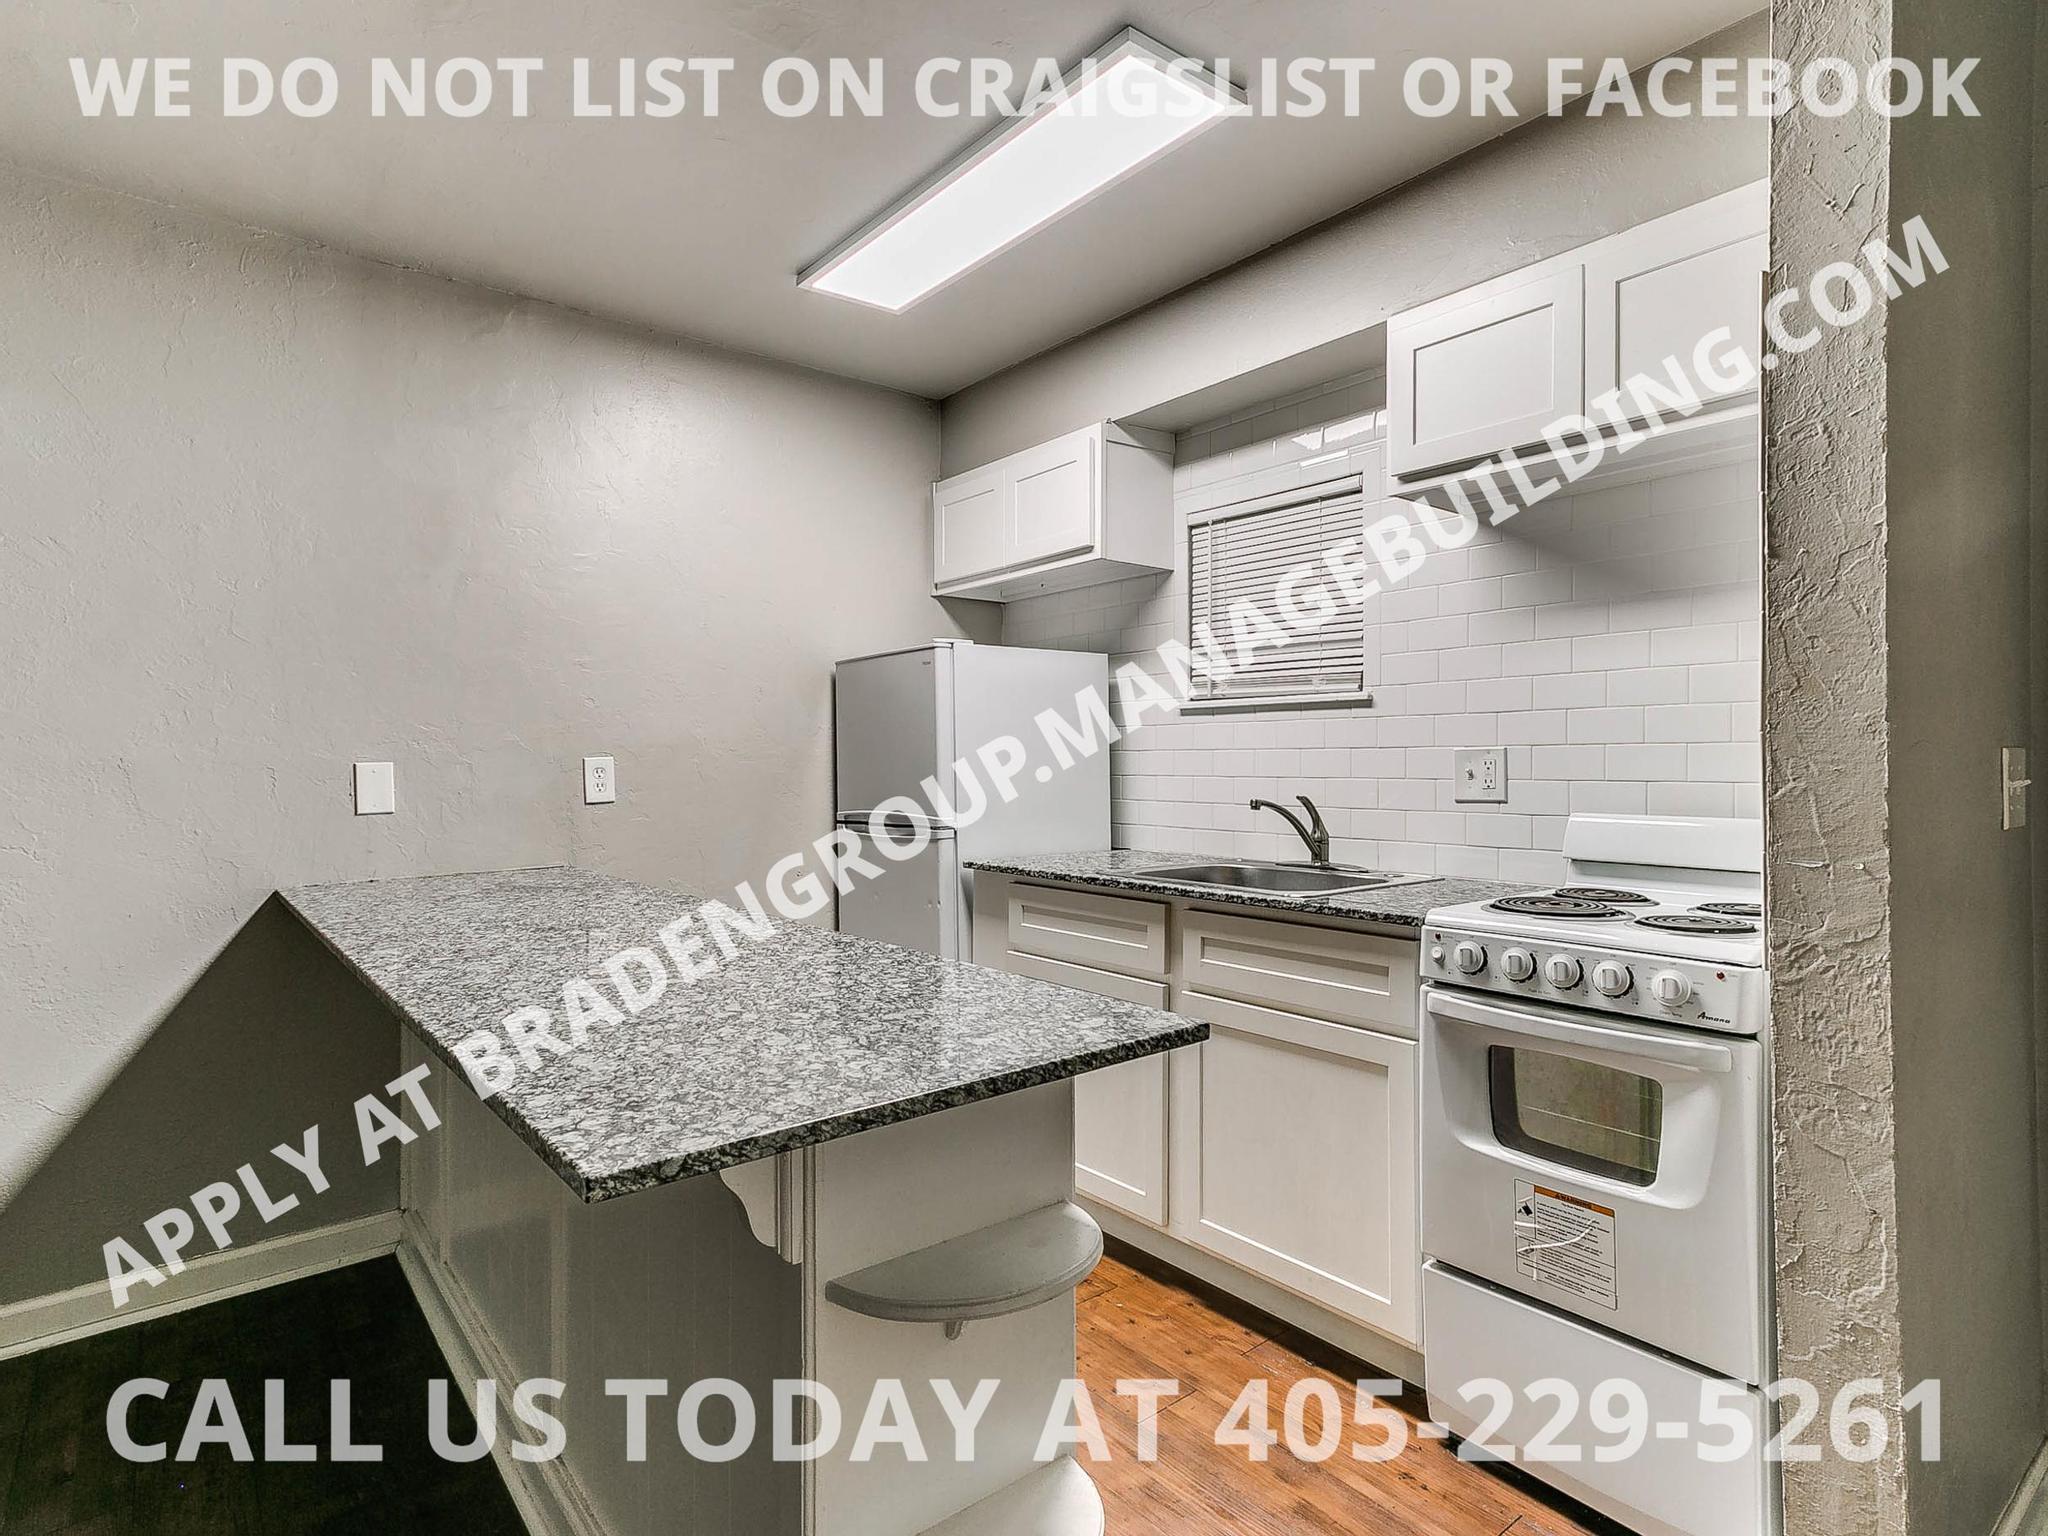 2748 NW 23rd St. Unit 1